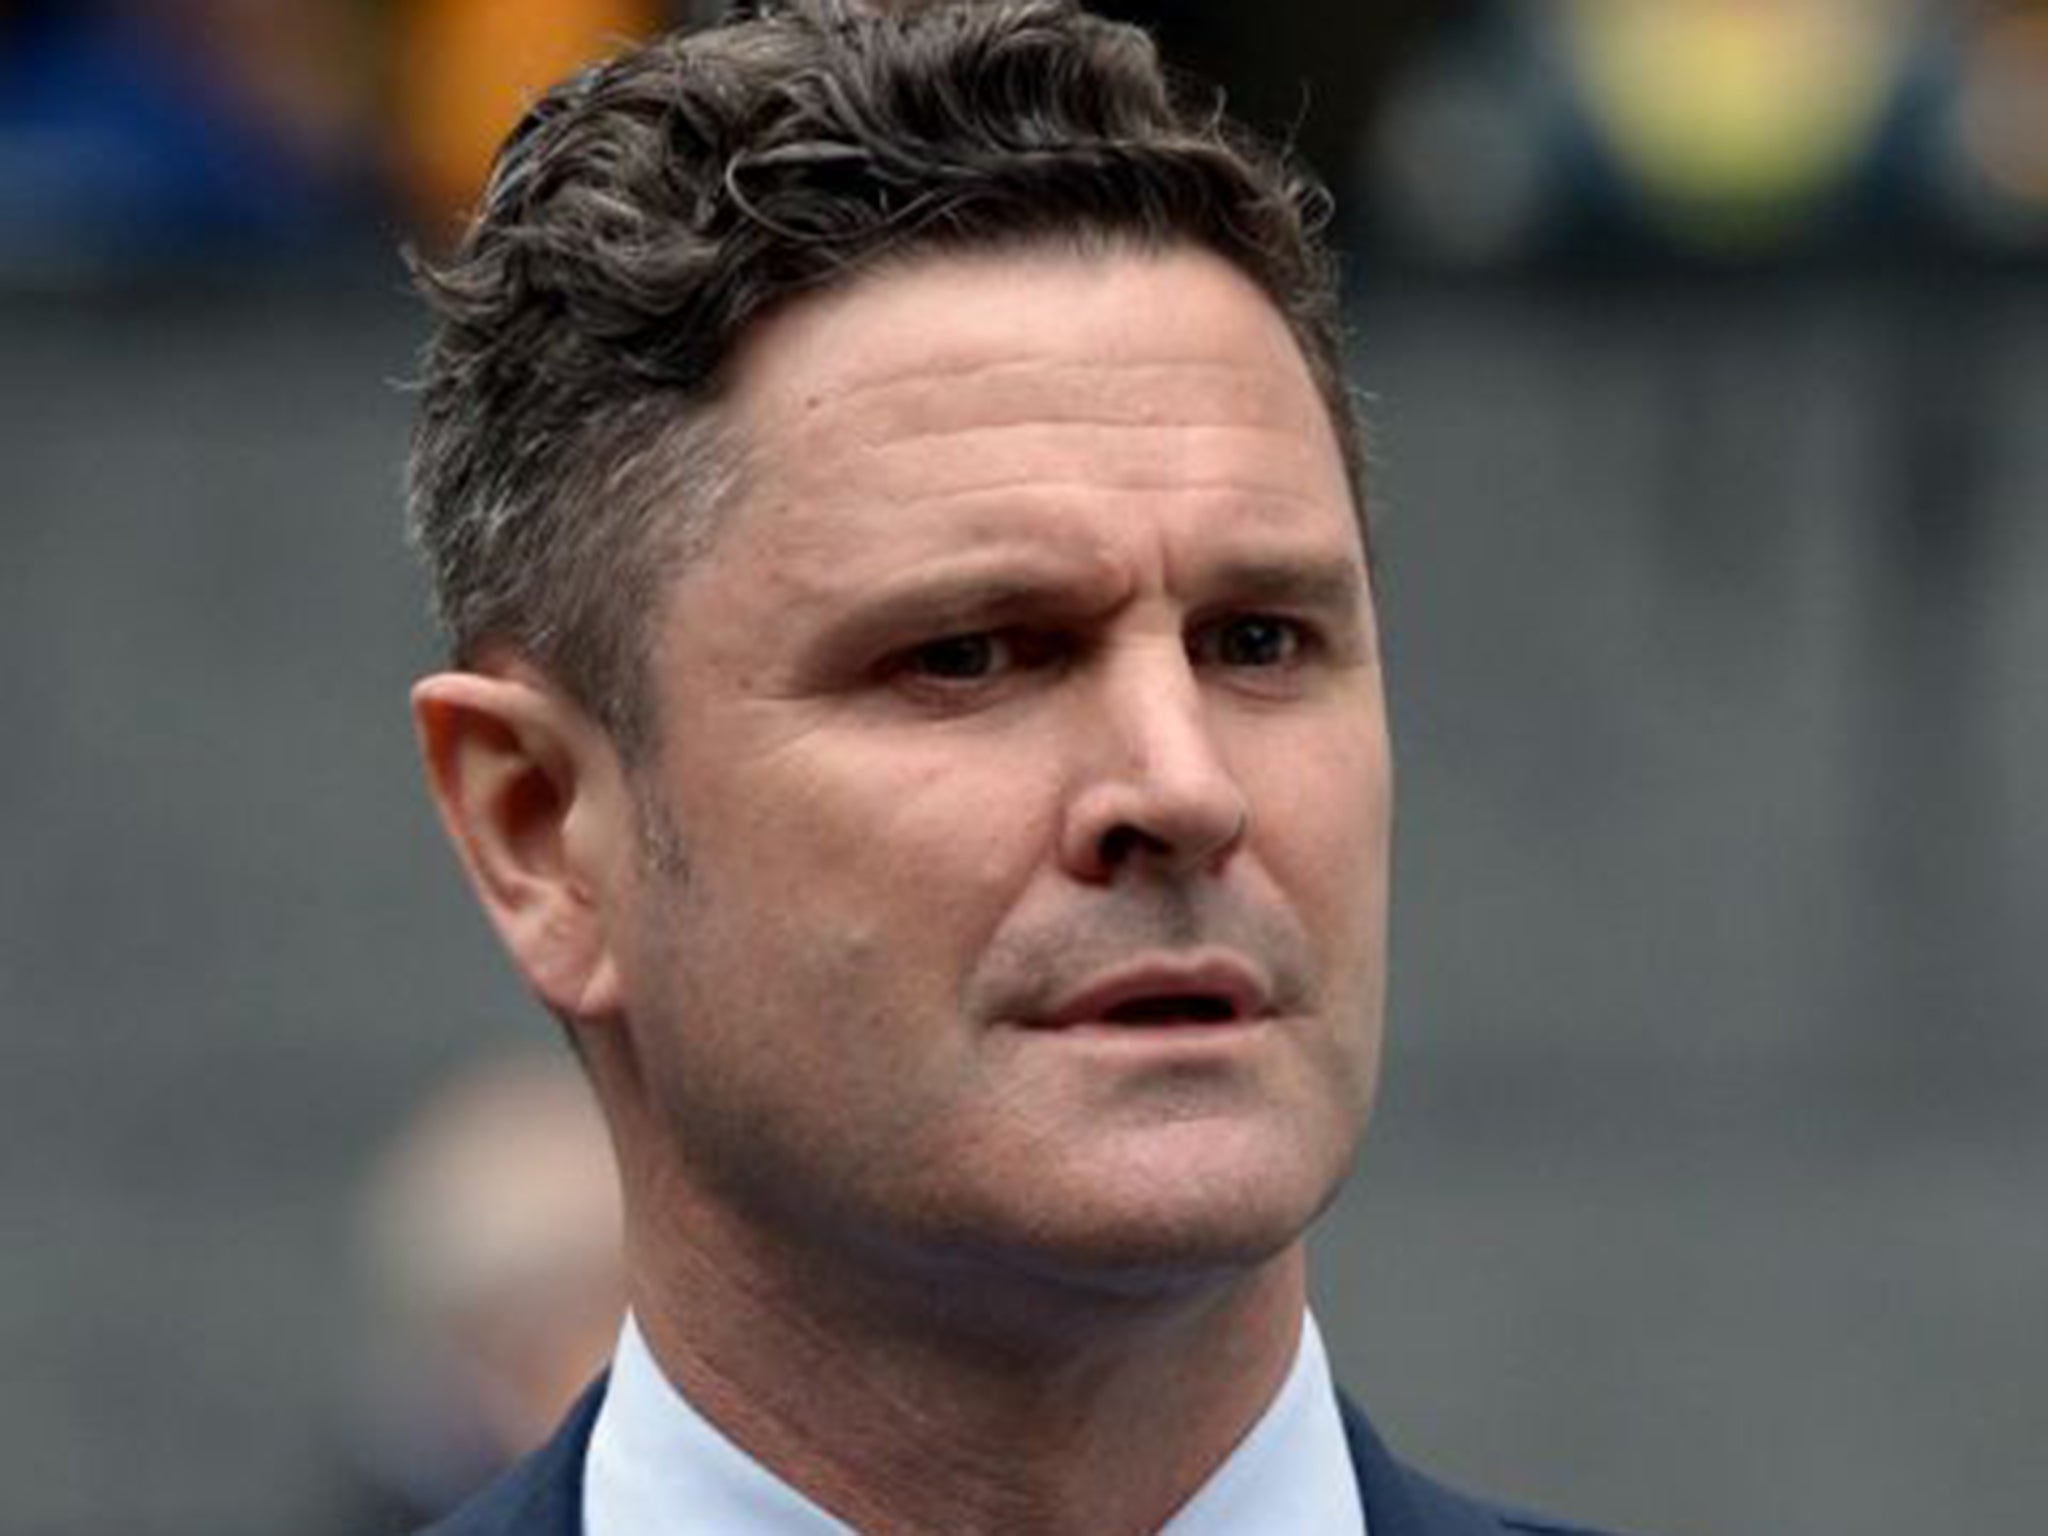 Chris Cairns played with Vincent for the Chandigarh Lions in the Indian Premier League